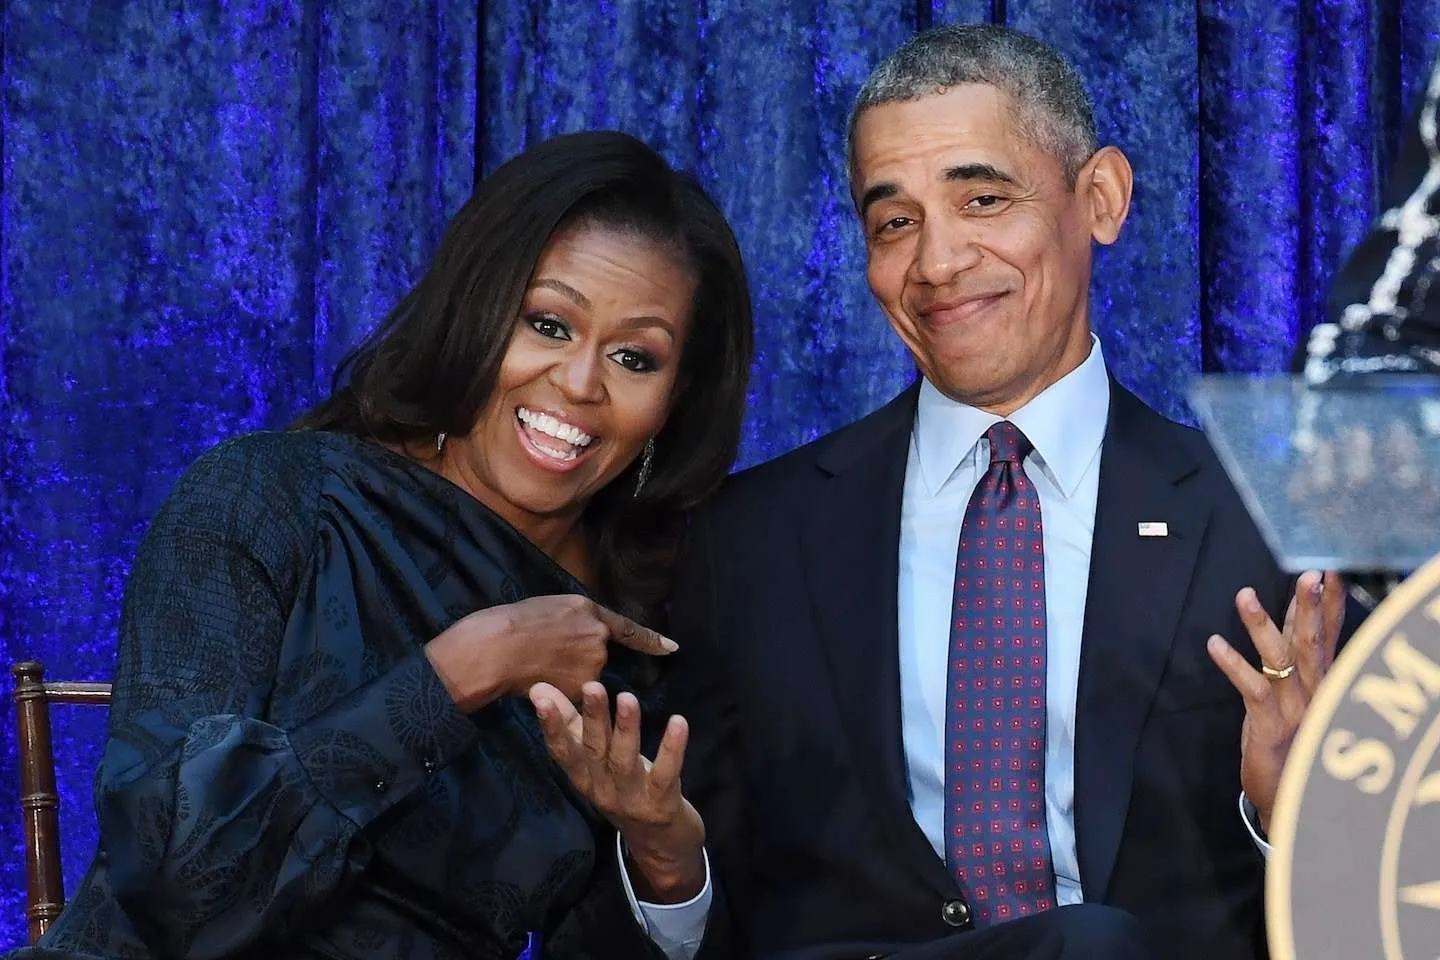 Michelle Obama pointing at Barack Obama laughing happy on stage